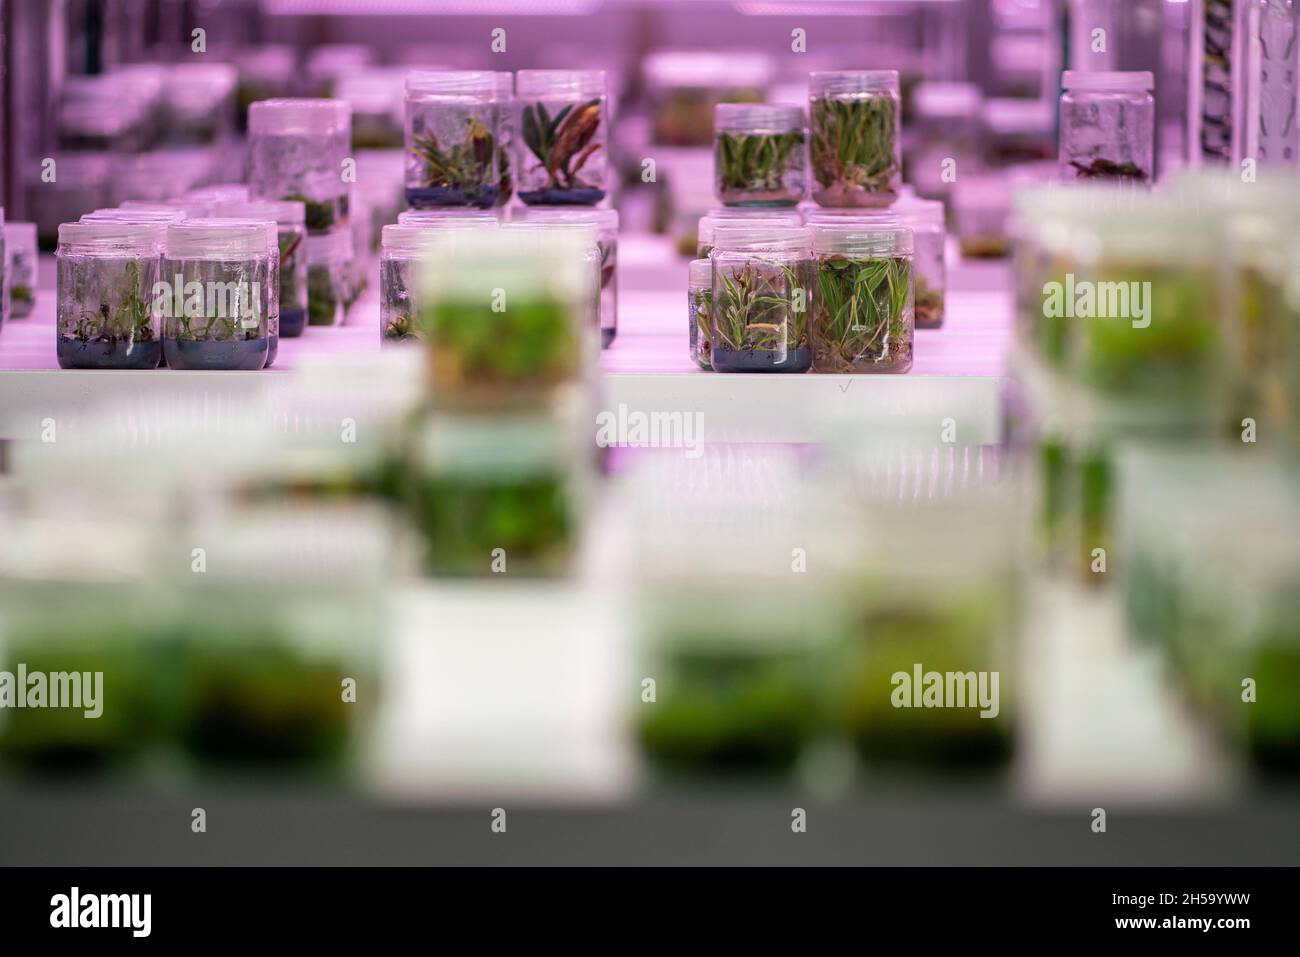 (211108) -- KUNMING, Nov. 8, 2021 (Xinhua) -- Photo taken on Oct. 20, 2021 shows germplasm preserved at in vitro storage room at the Germplasm Bank of Wild Species in Kunming, southwest China's Yunnan Province. The Germplasm Bank of Wild Species, located in the northern suburb of Kunming, capital of China's Yunnan Province, is a 'Noah's Ark' for tens of thousands of species, including rare Davidia involucrata, Taxus himalayana and Rhinopithecus bieti. The Germplasm Bank of Wild Species has preserved 85,046 accessions from 10,601 species of wild plants, accounting for 36 percent of the numb Stock Photo